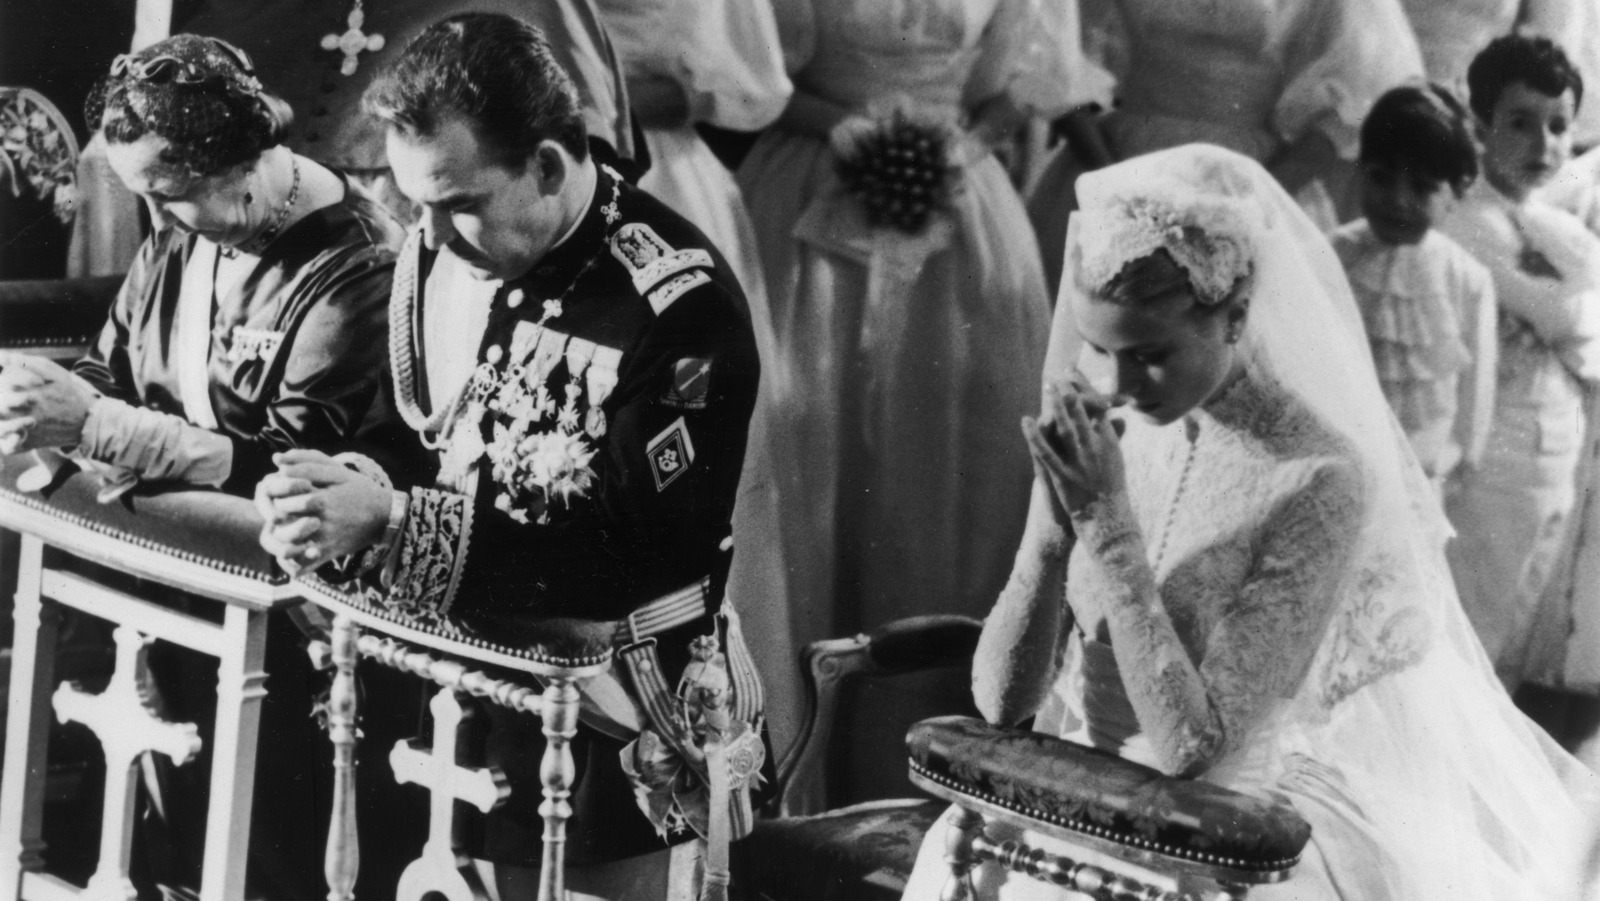 Grace Kelly's wedding dress had a fascinating history with ties to